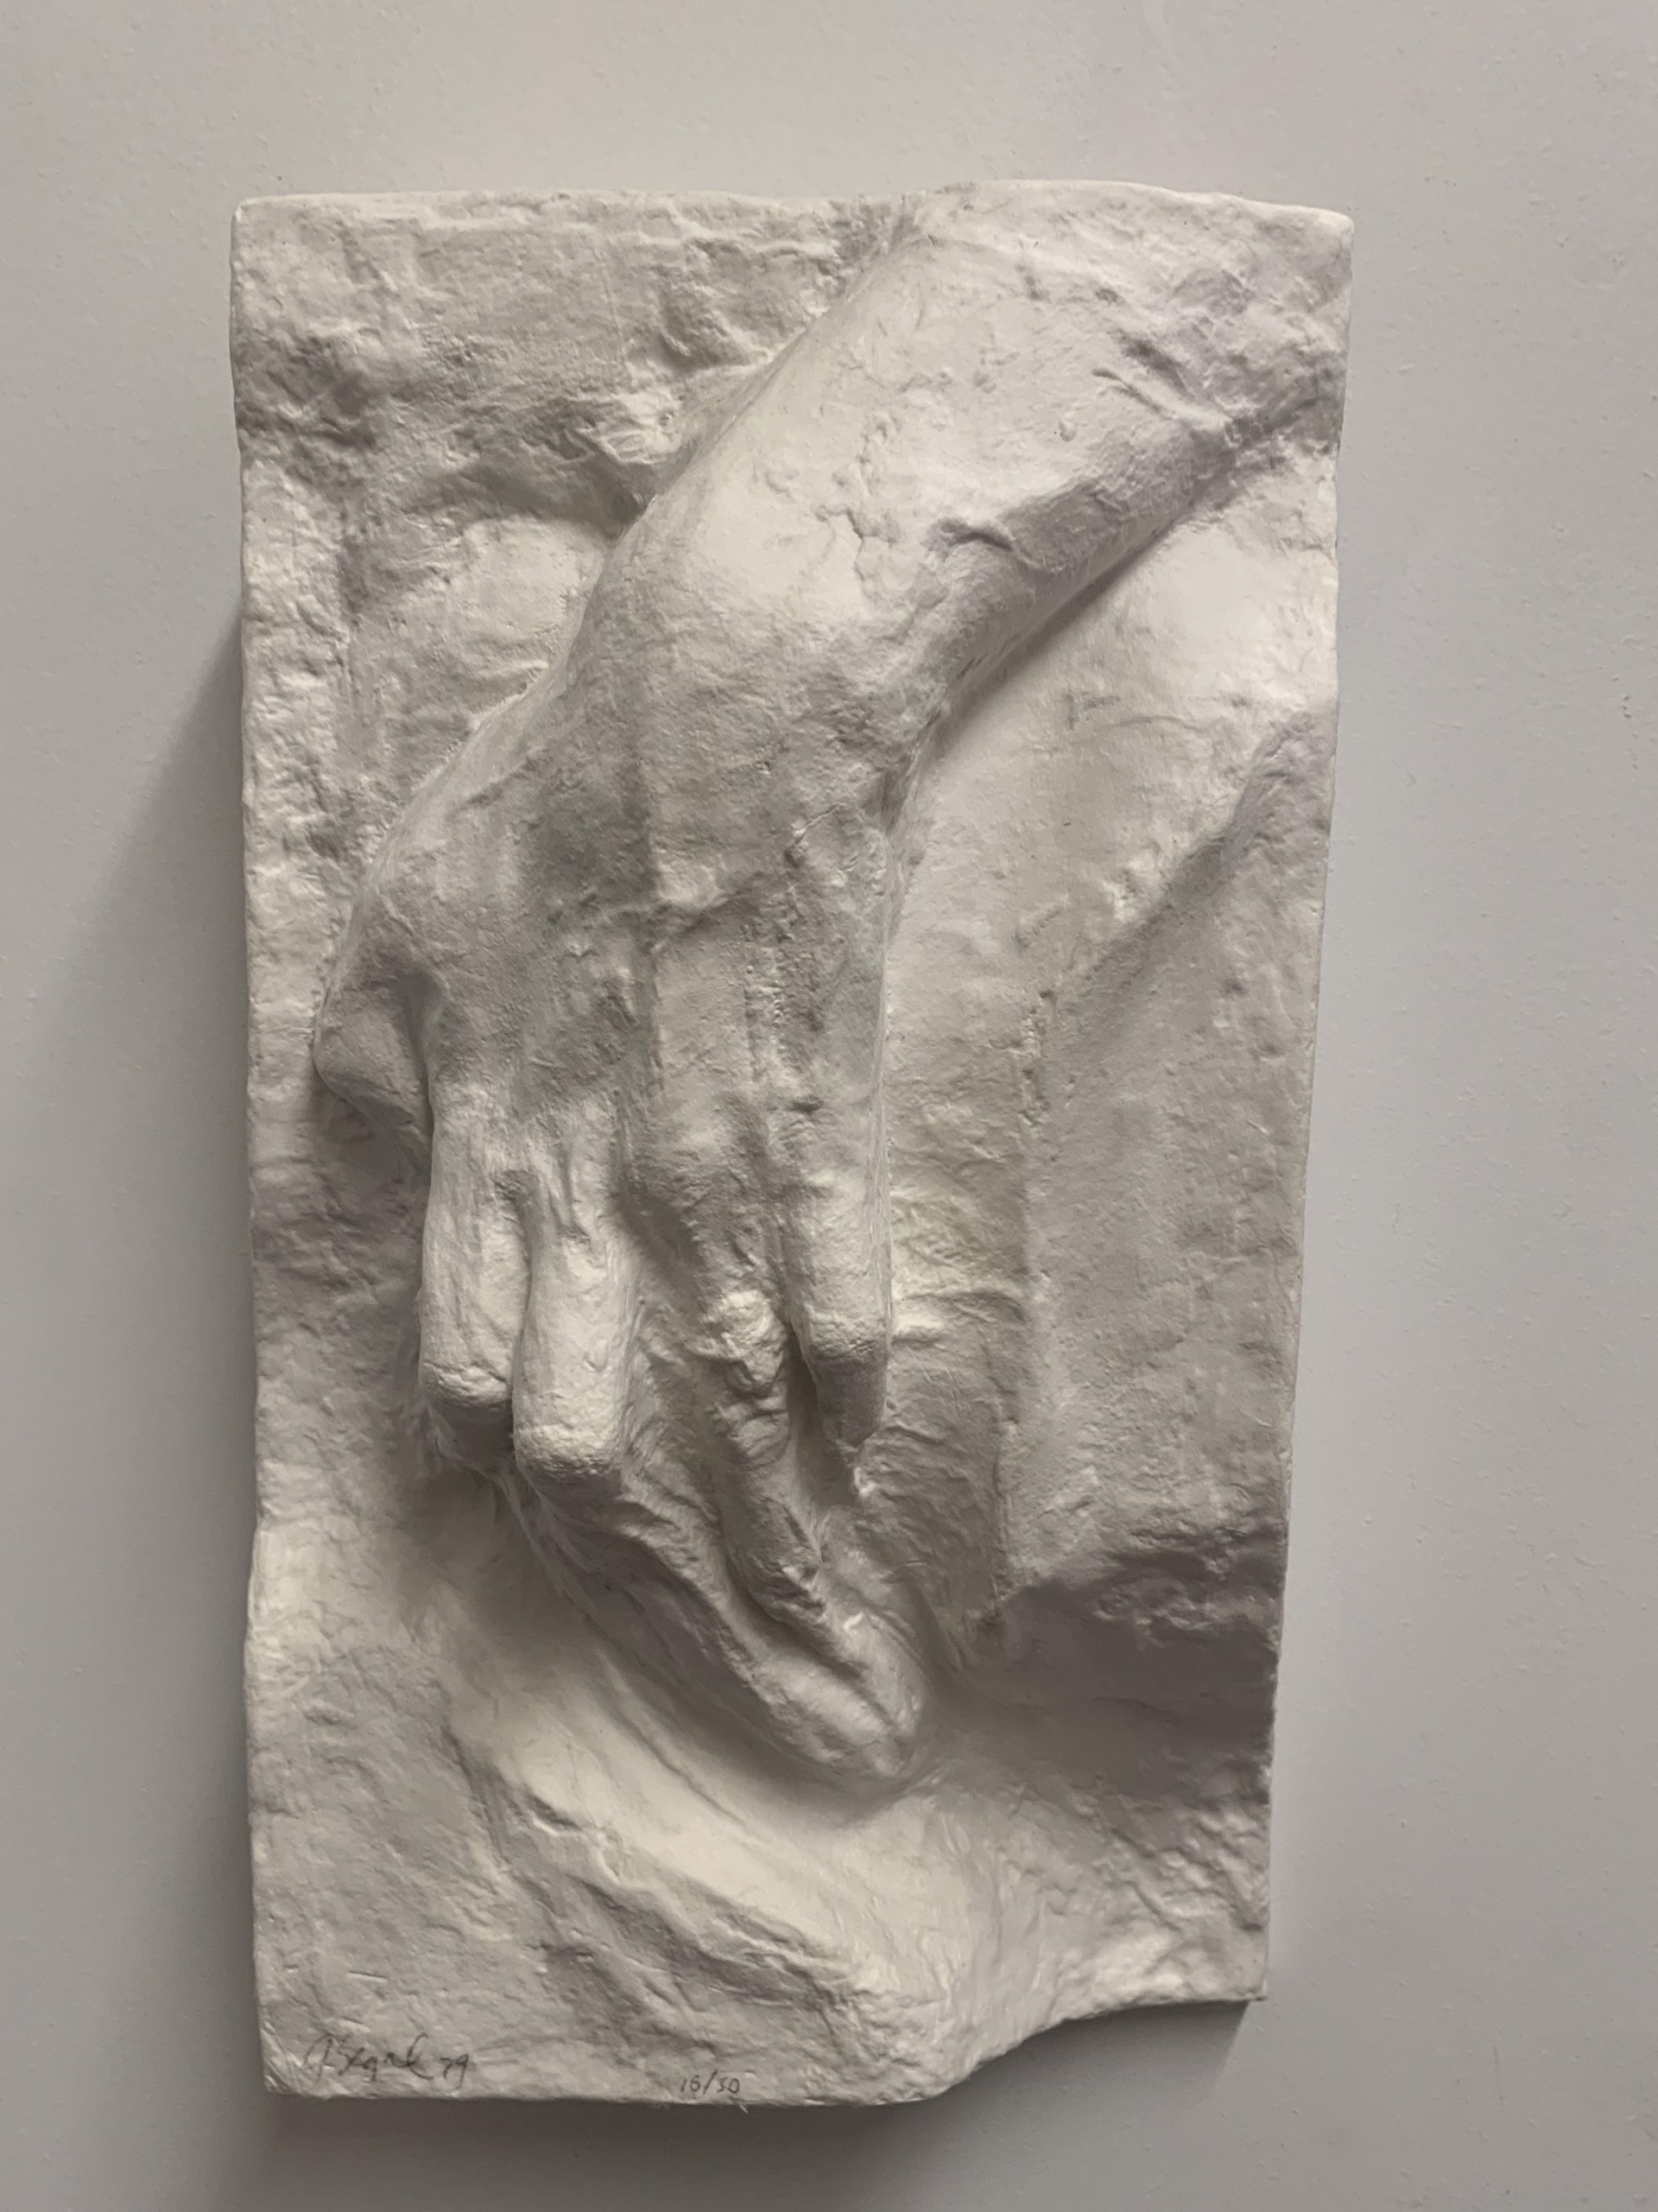 WOMAN'S HANDS by George Segal